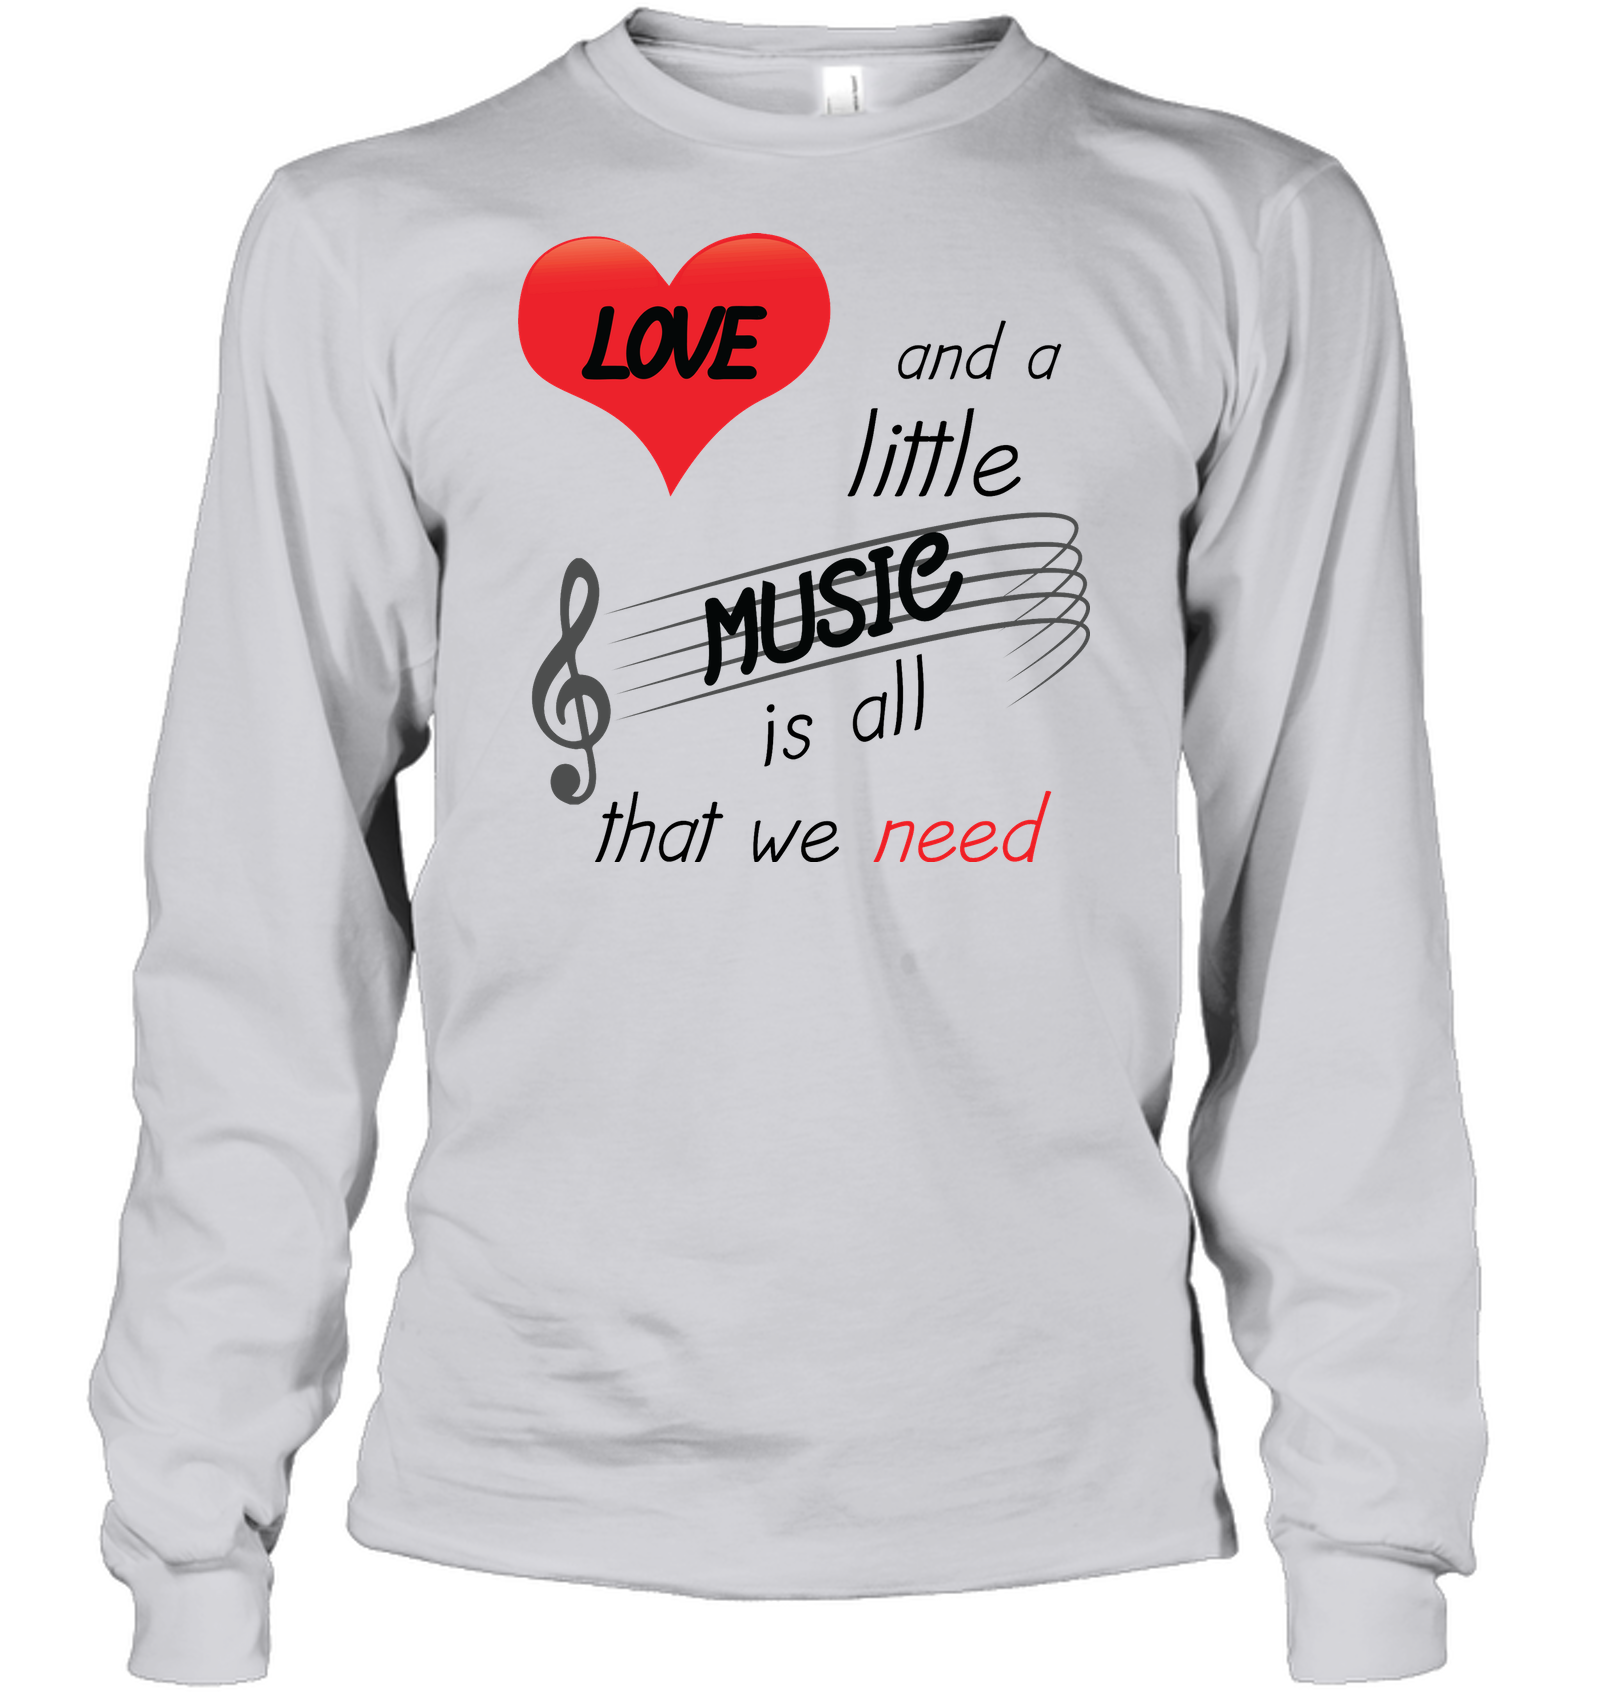 Love and a Little Music is all that we need - Gildan Adult Classic Long Sleeve T-Shirt